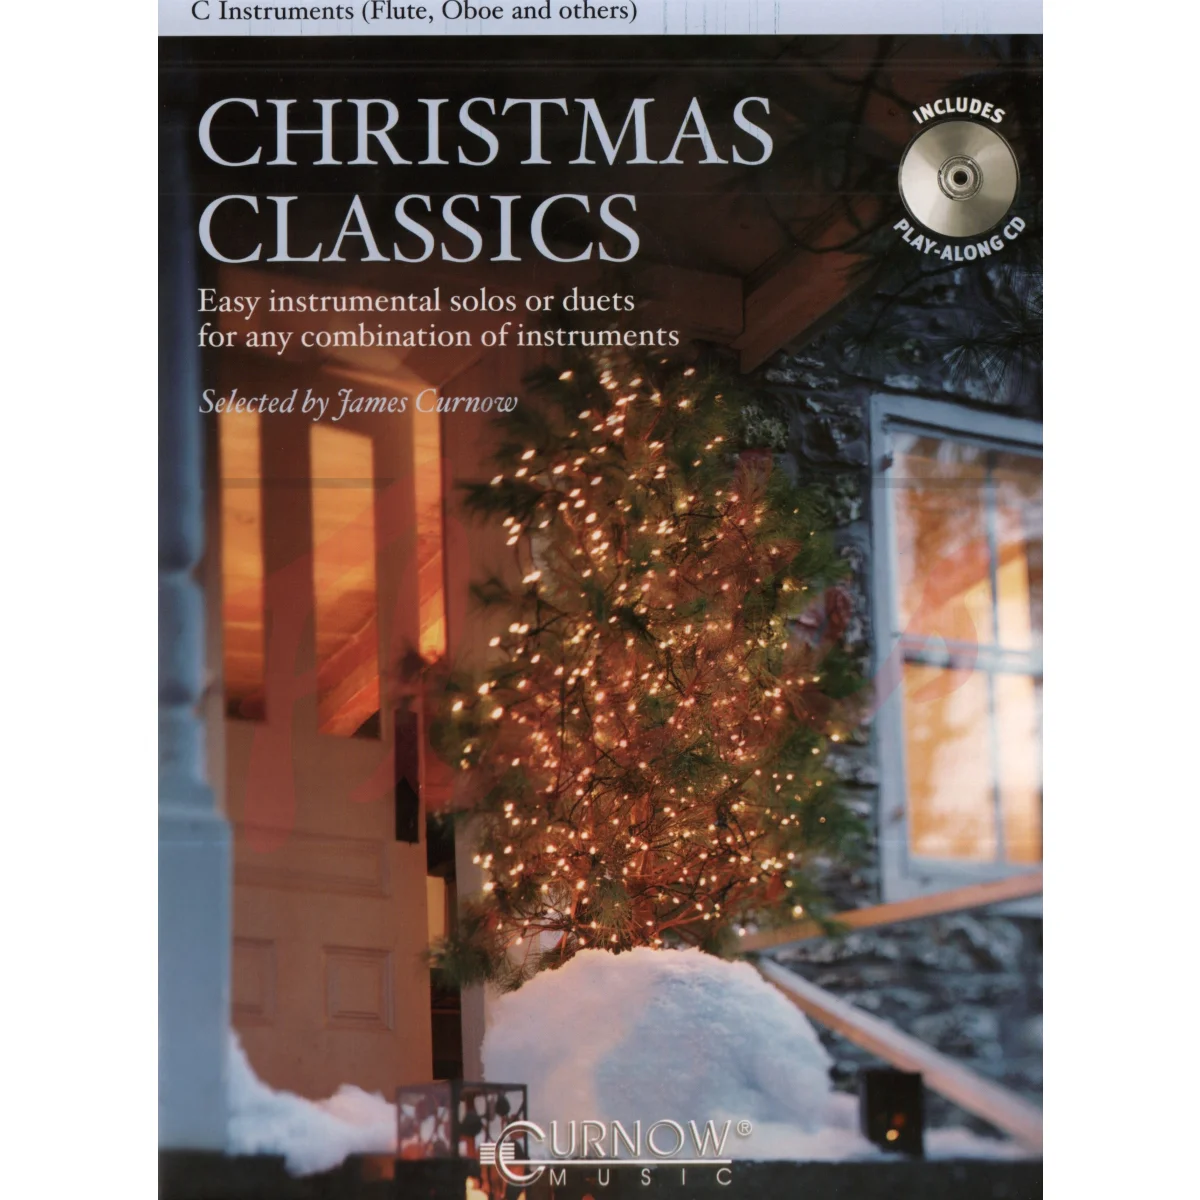 Christmas Classics for One or Two Flutes